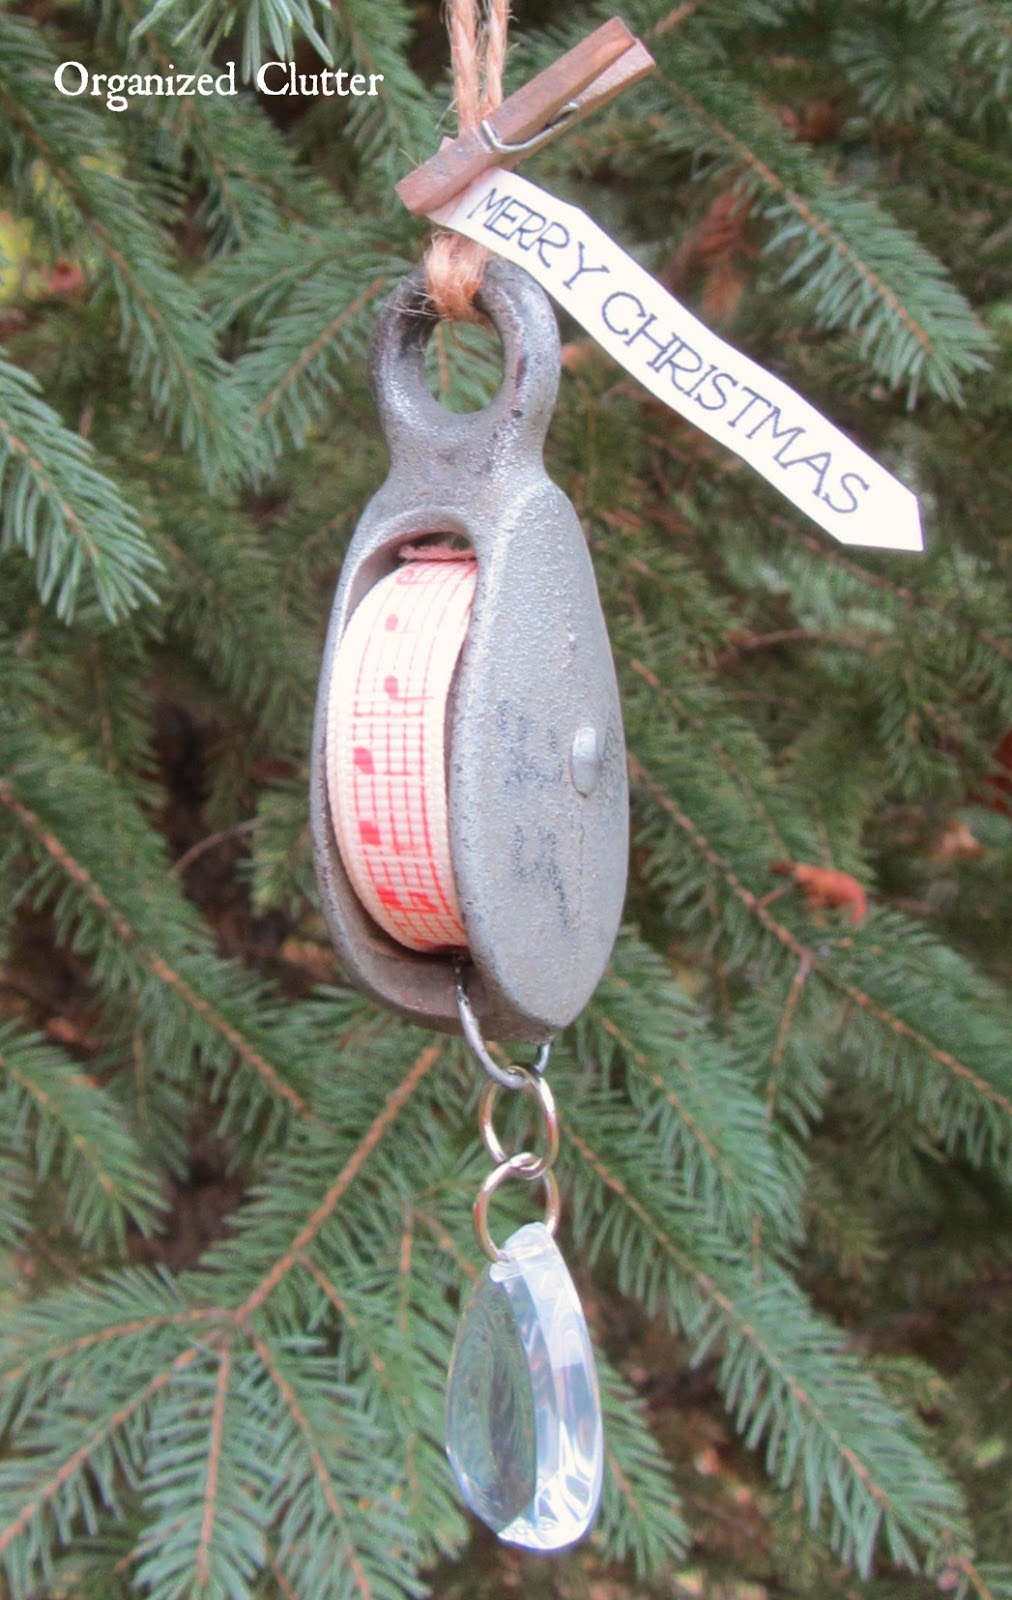 Christmas Ribbon on a Repurposed Pulley www.organizedclutterqueen.blogspot.com